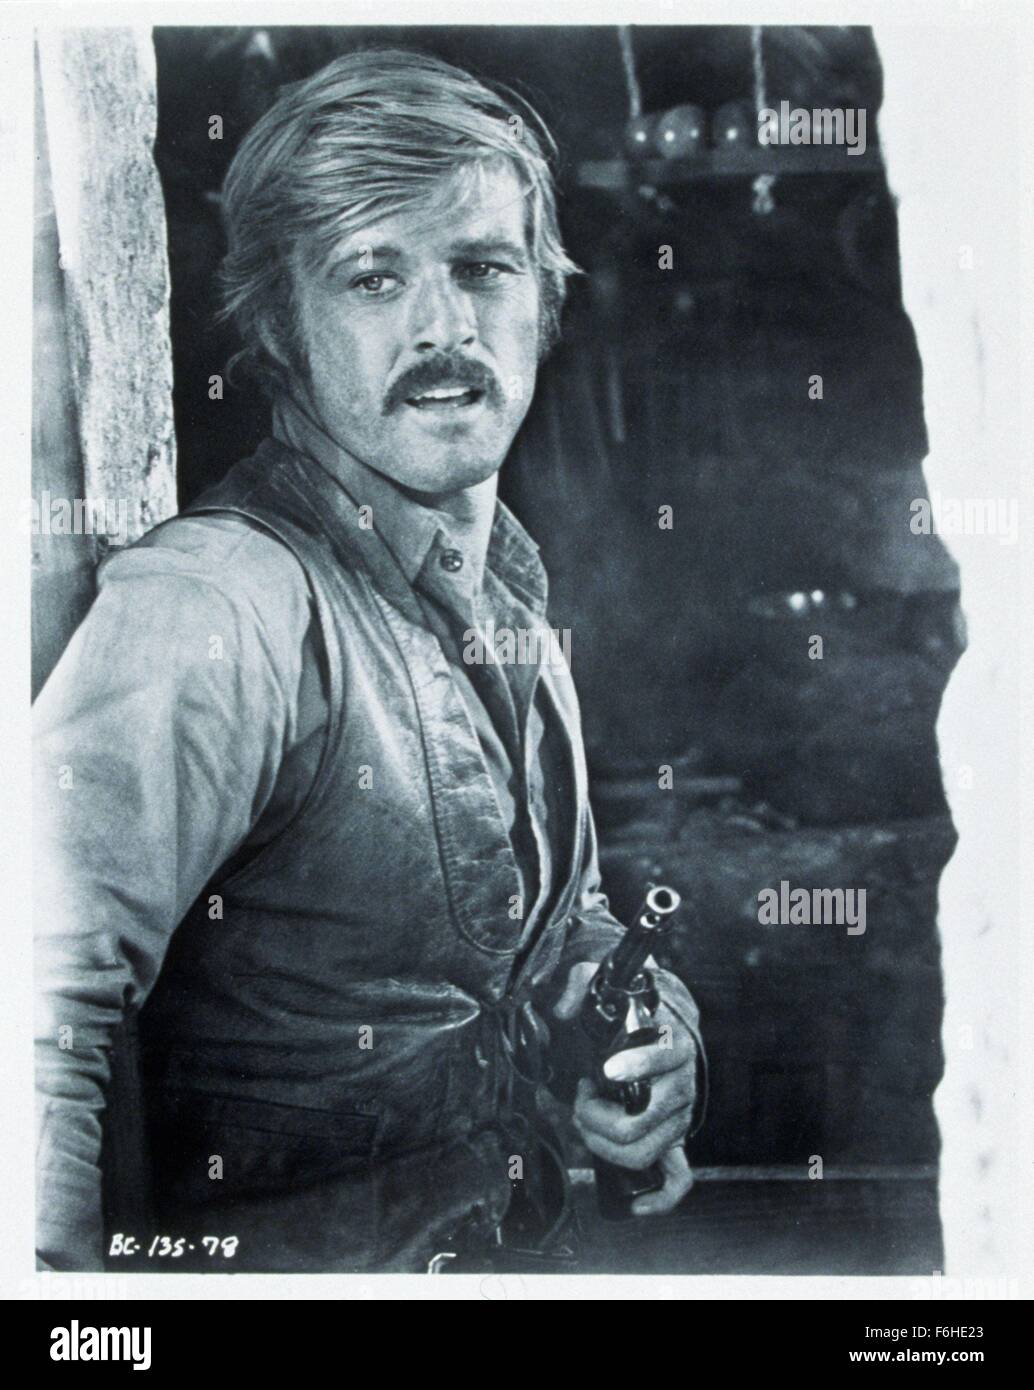 1969, Film Title: BUTCH CASSIDY AND THE SUNDANCE KID, Director: GEORGE ROY HILL, Pictured: GEORGE ROY HILL, MOUSTACHE. (Credit Image: SNAP) Stock Photo